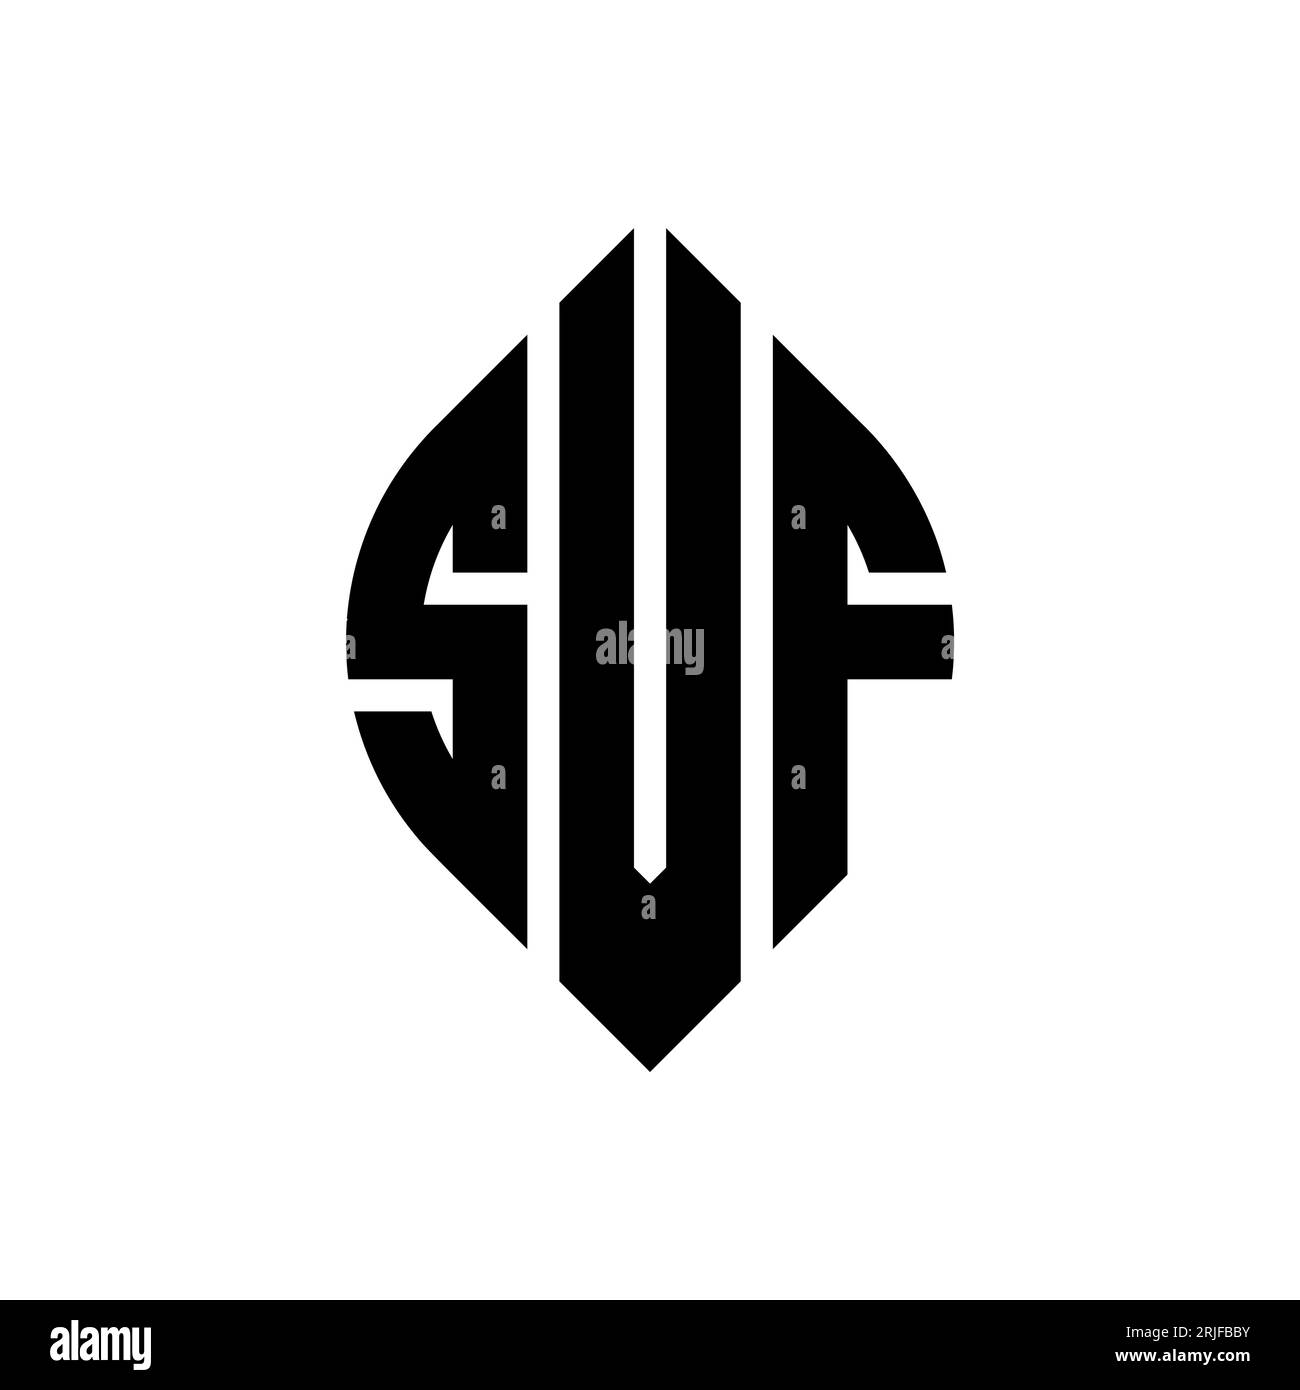 svf circle letter logo design with circle and ellipse shape svf ellipse letters with typographic style the three initials form a circle logo svf ci 2RJFBBY